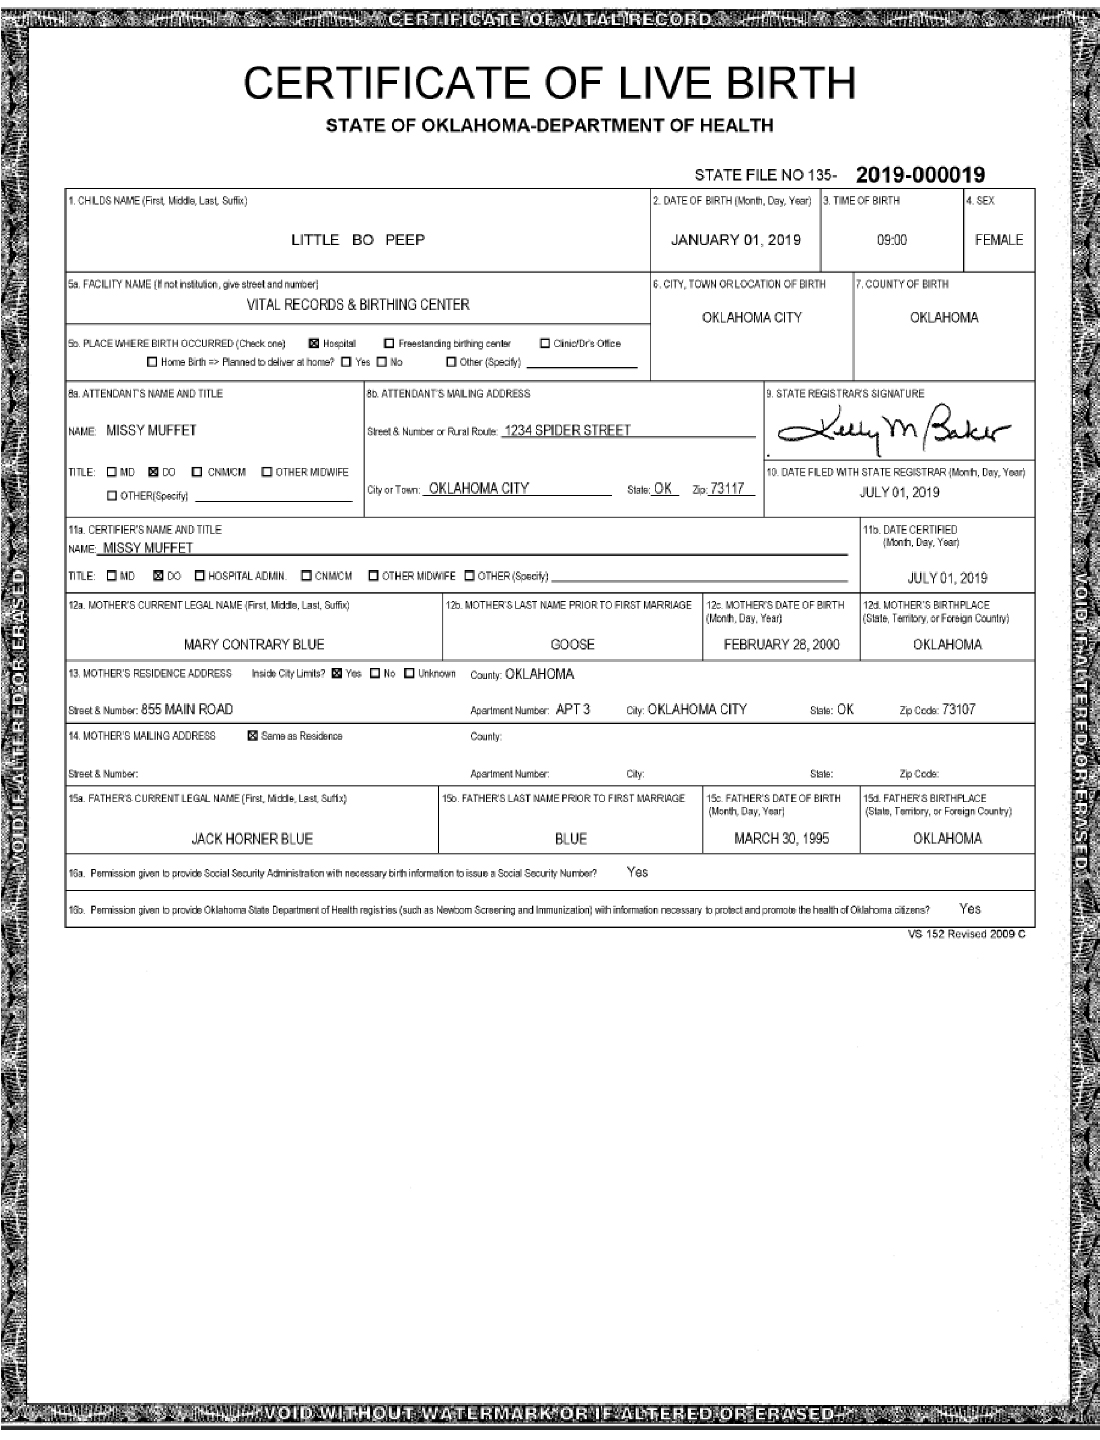 U.S. birth certificate issued by a state or local government